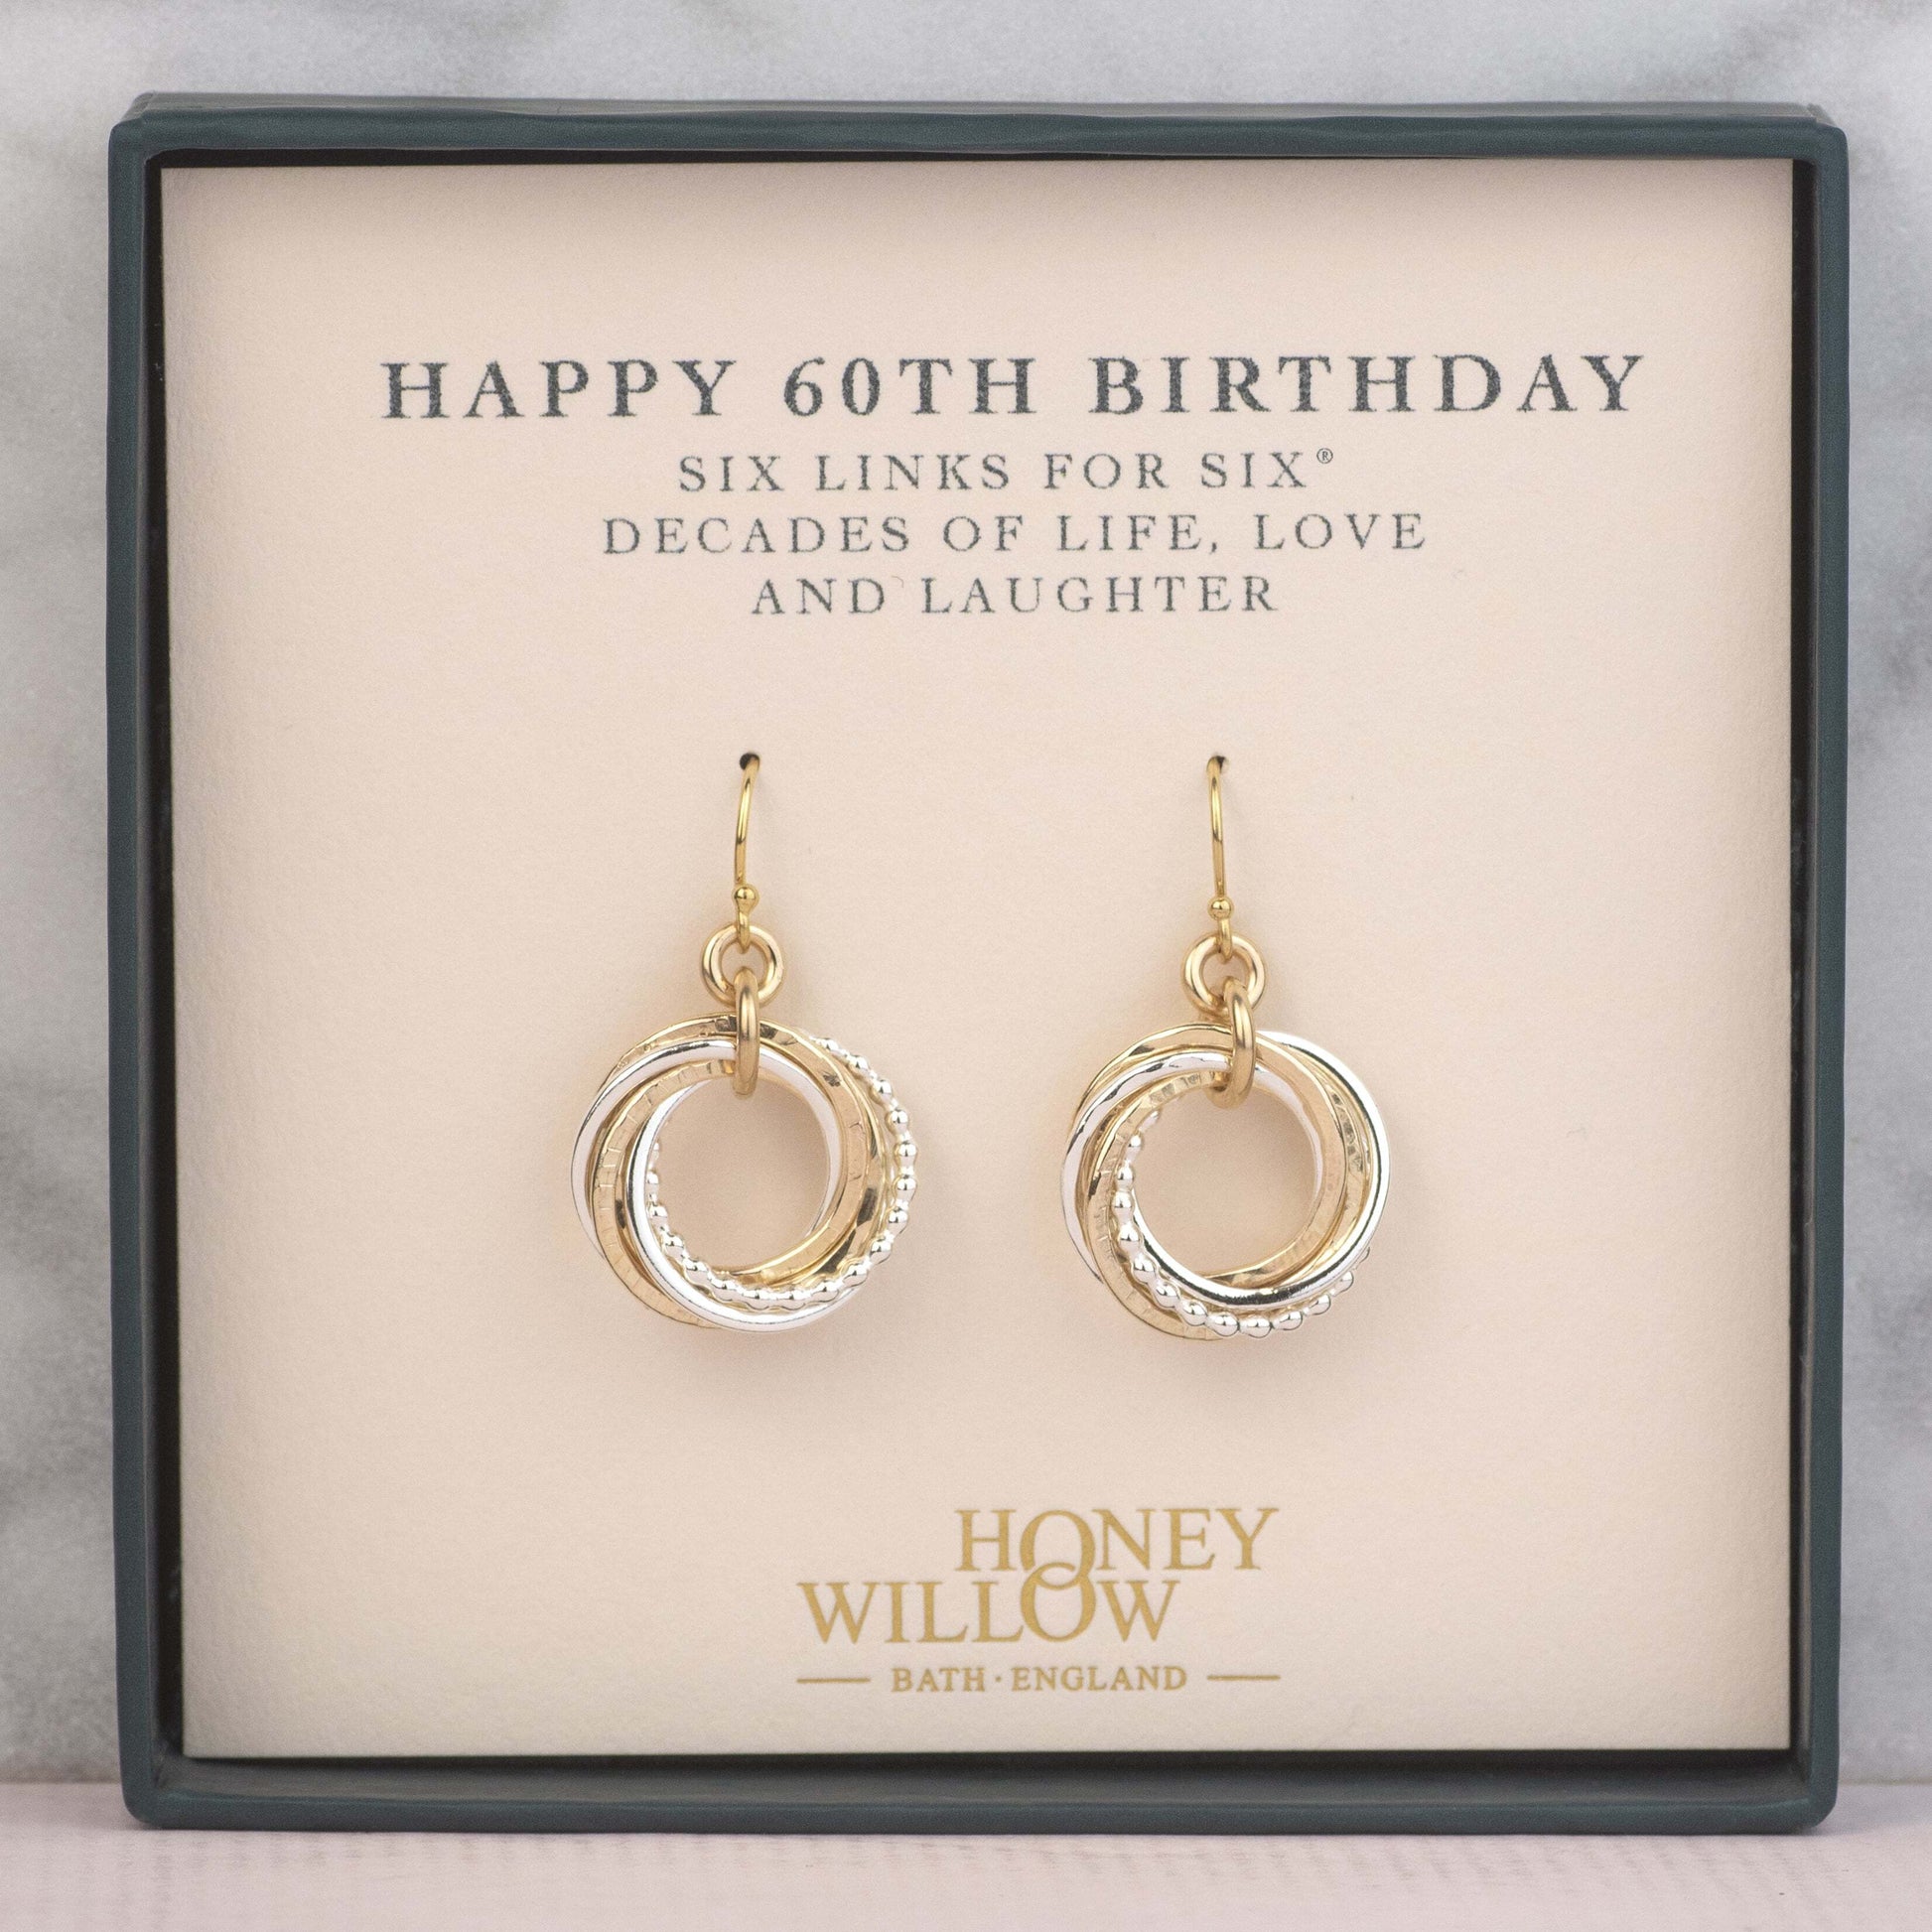 60th Birthday Earrings - The Original 6 Links for 6 Decades Earrings - Petite Silver & Gold